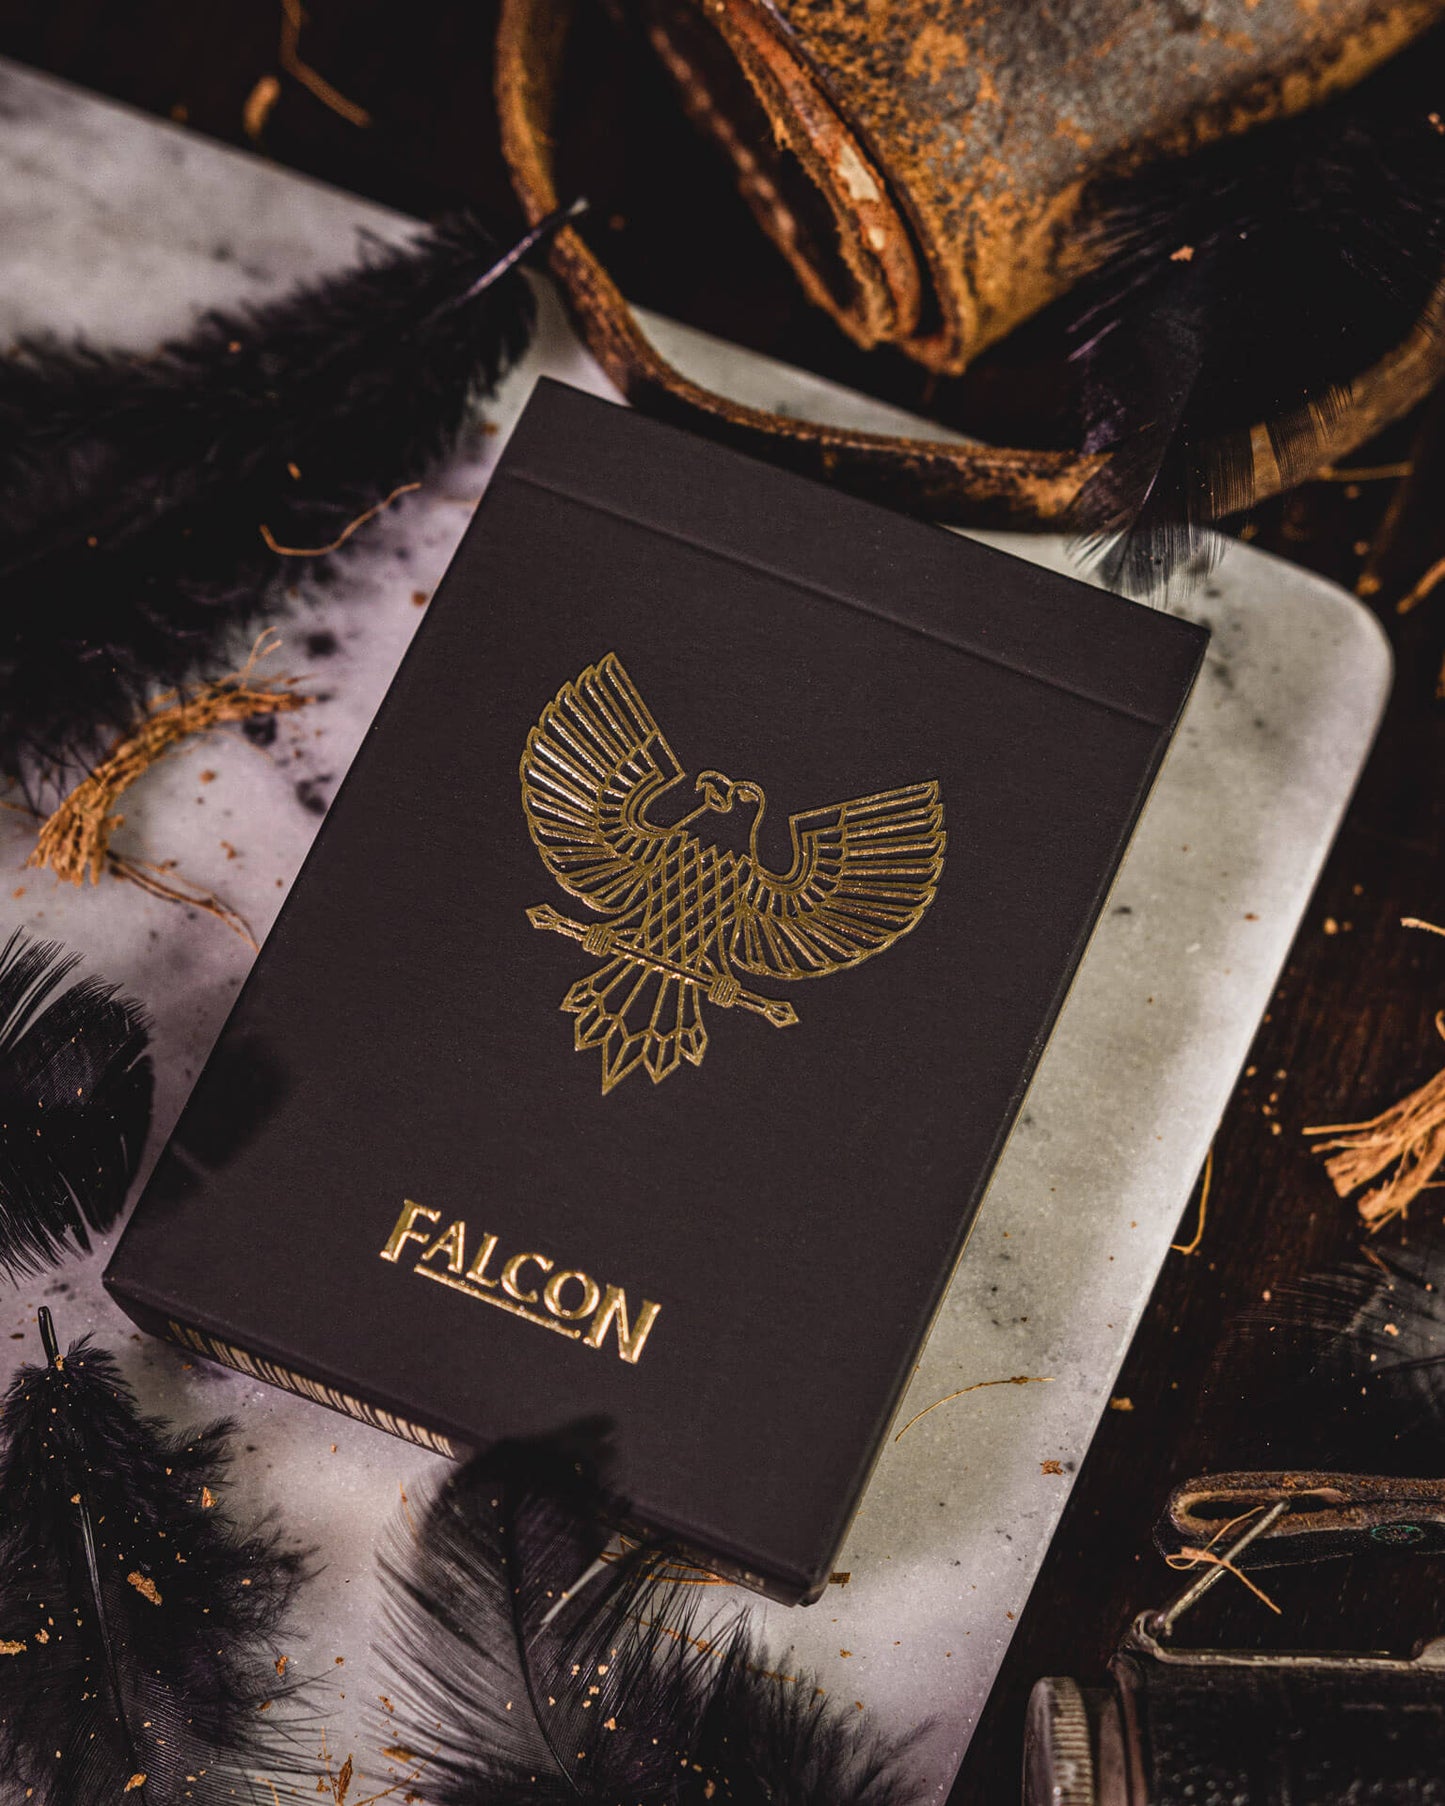 Falcon playing Cards